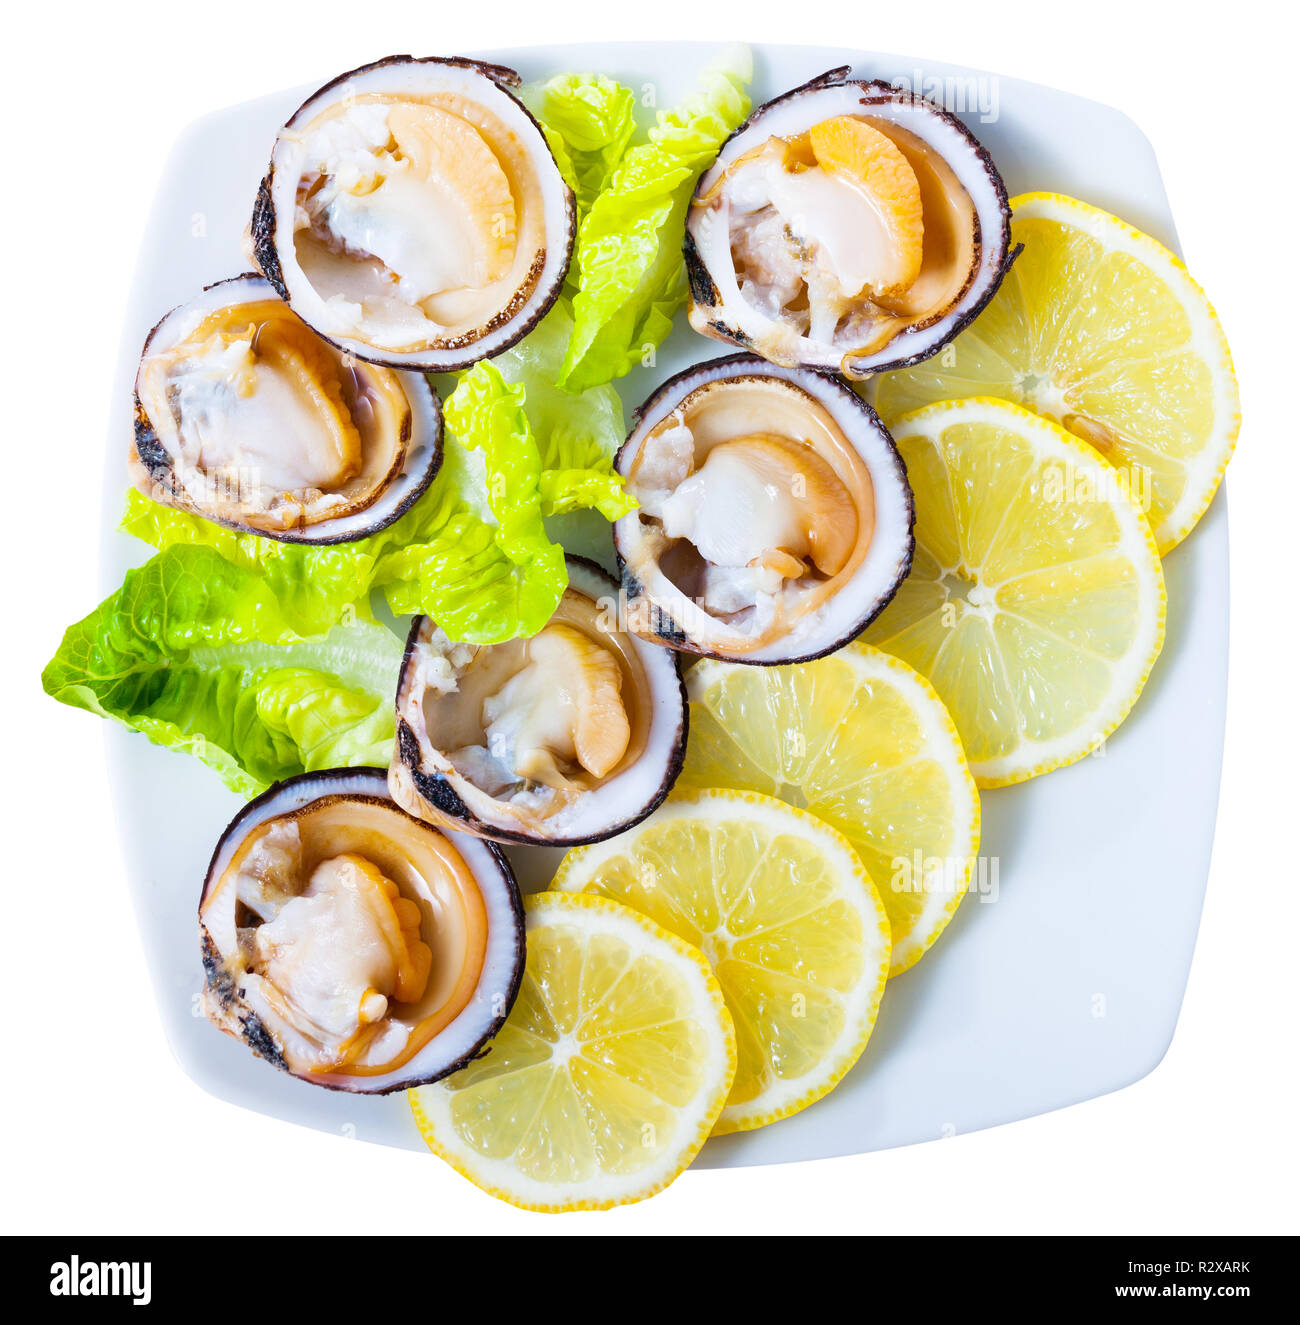 Seafood. Delicious raw fresh dog cockles served on white plate with greens and lemon. Isolated over white background Stock Photo